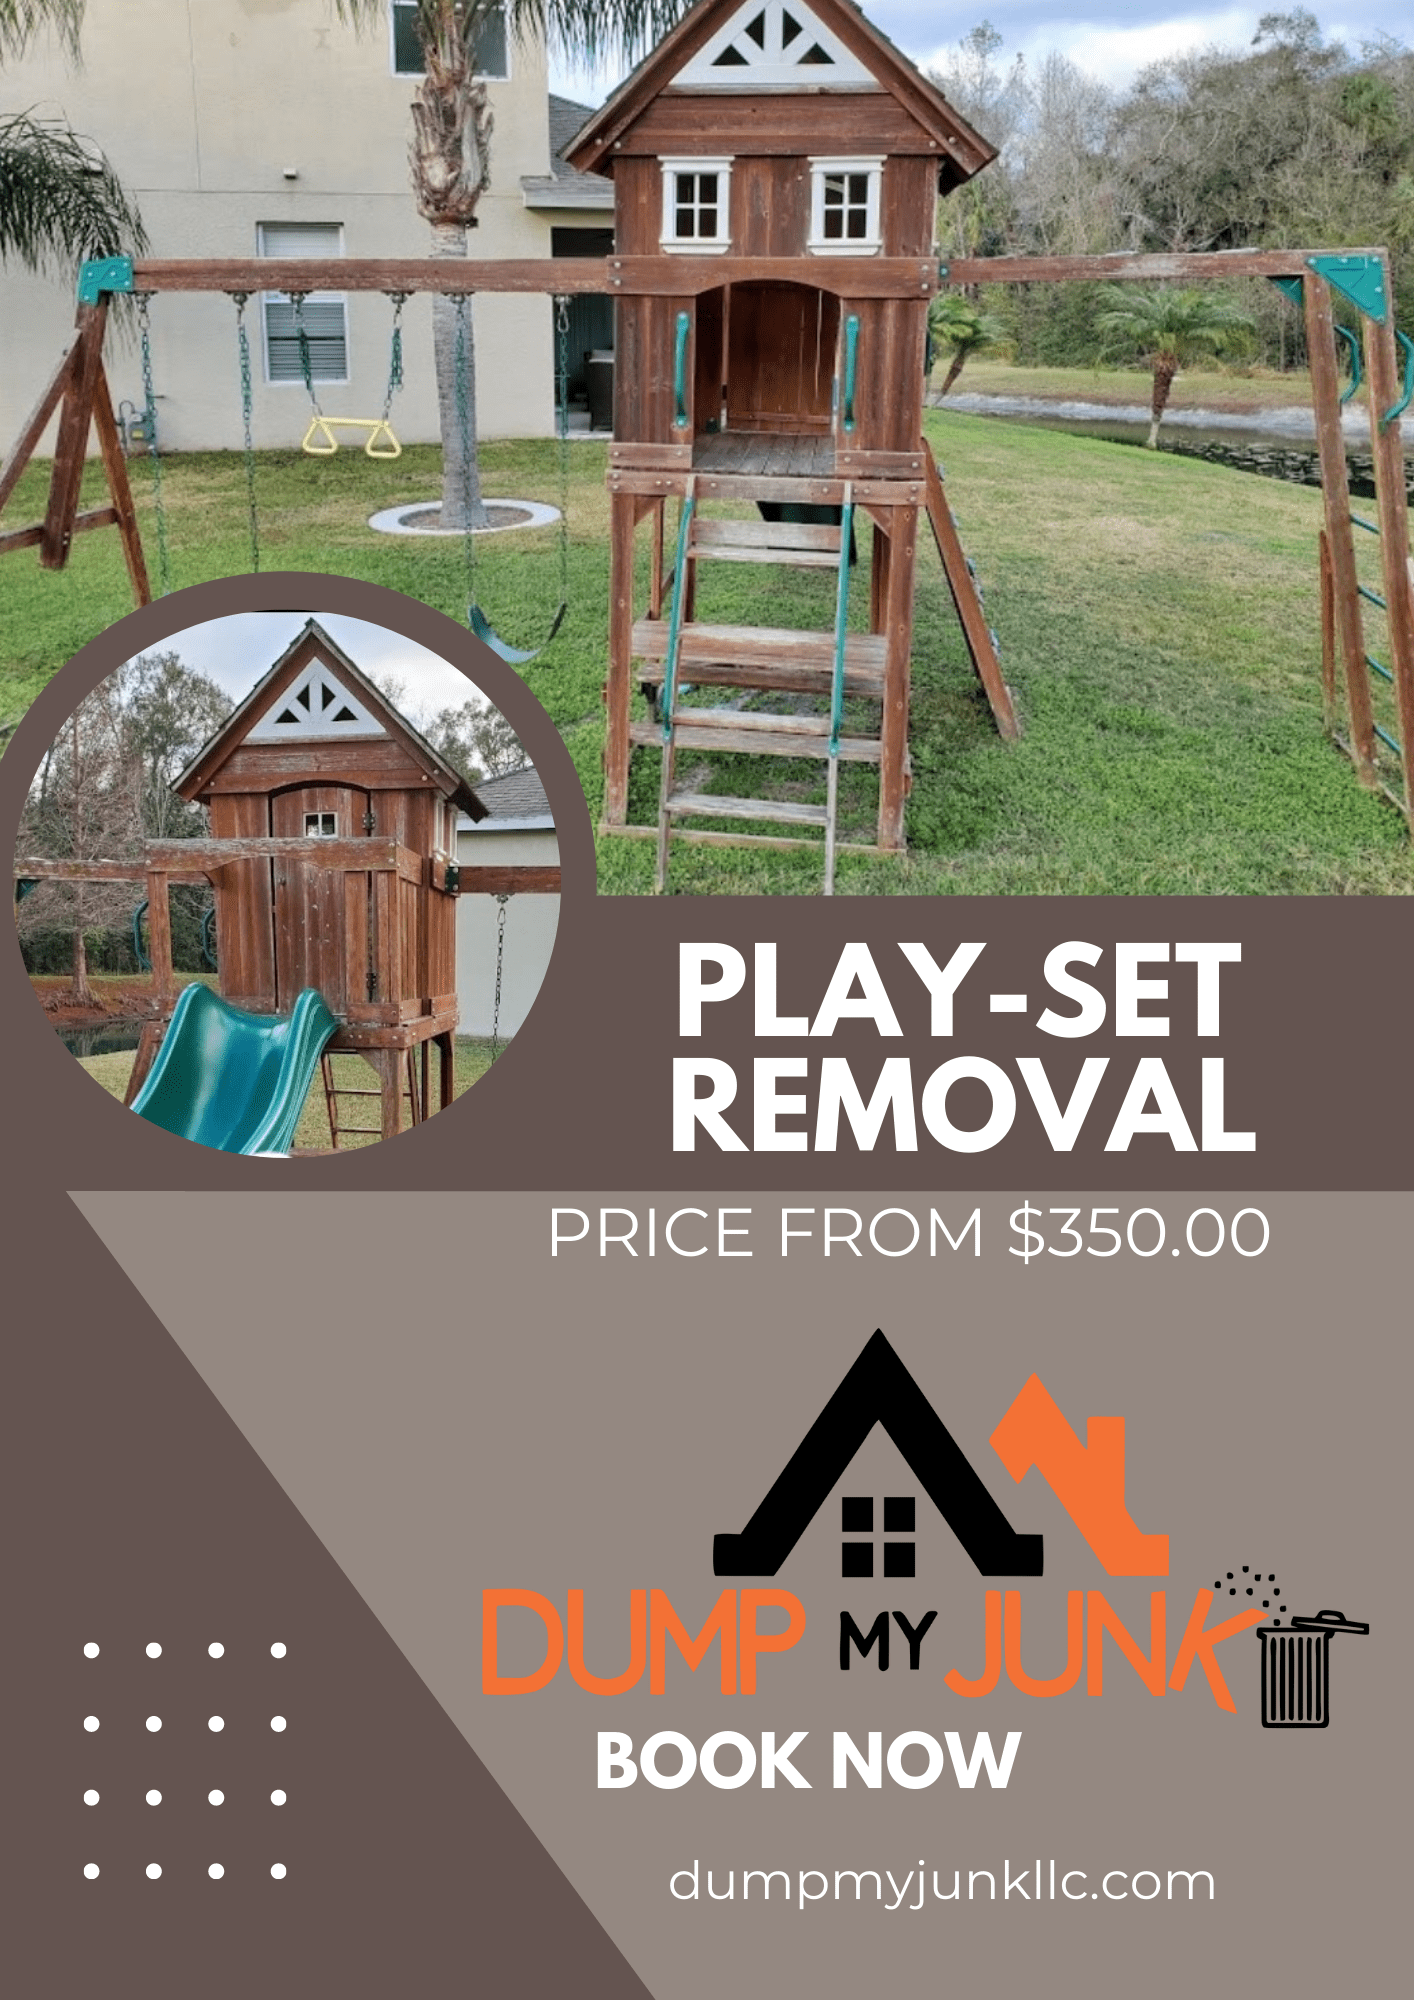 Play set removal